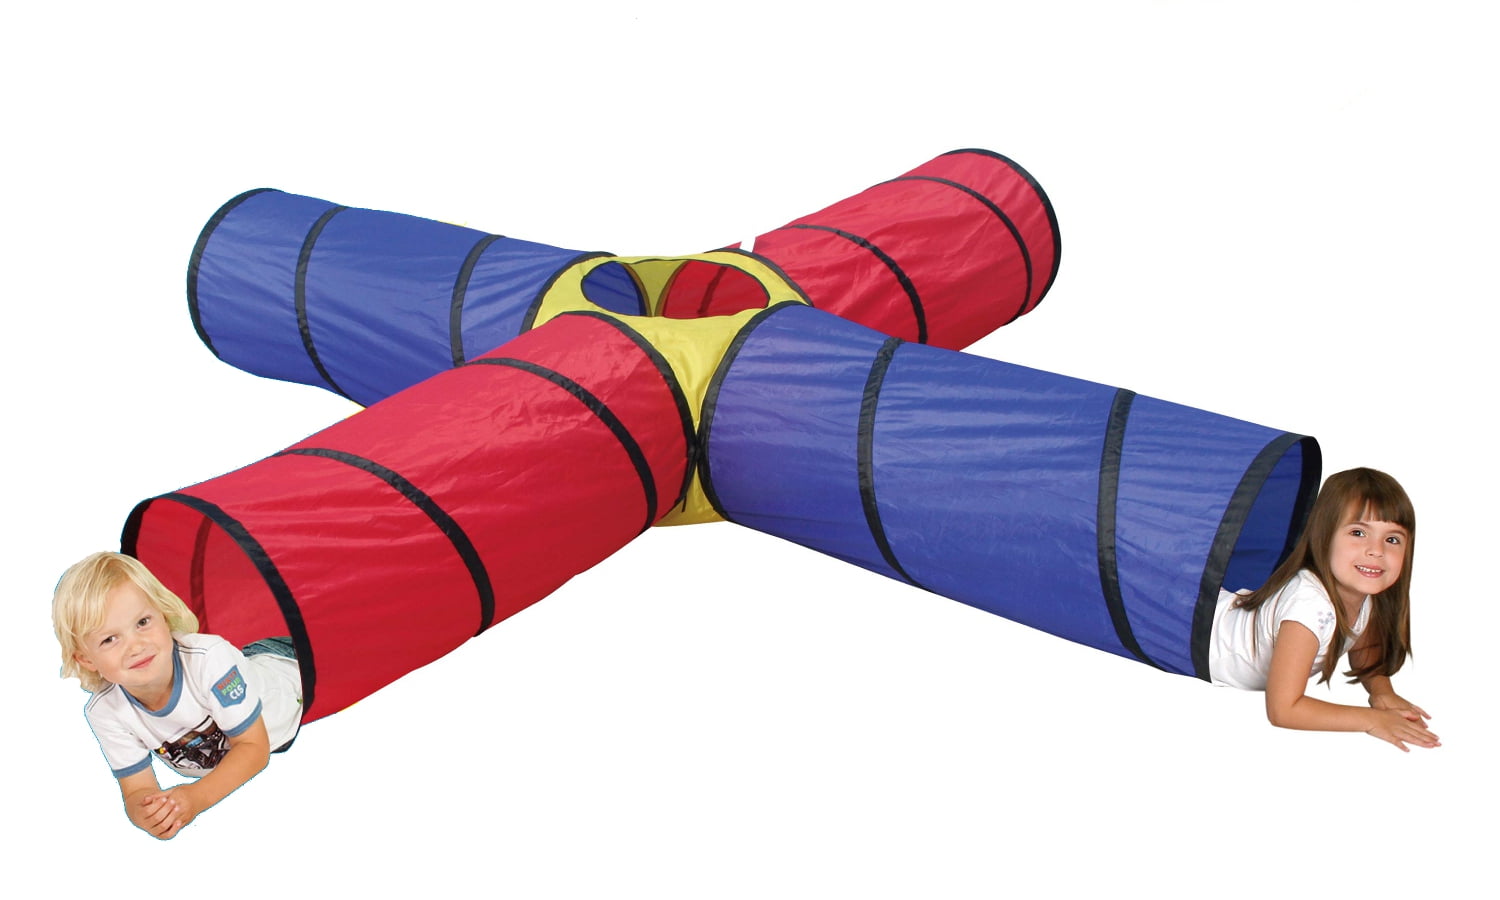 Kids Play Tunnel 4 Way 8ft Fun Indoor Outdoor Crawl Through Playgroup Pop up Toy for sale online 